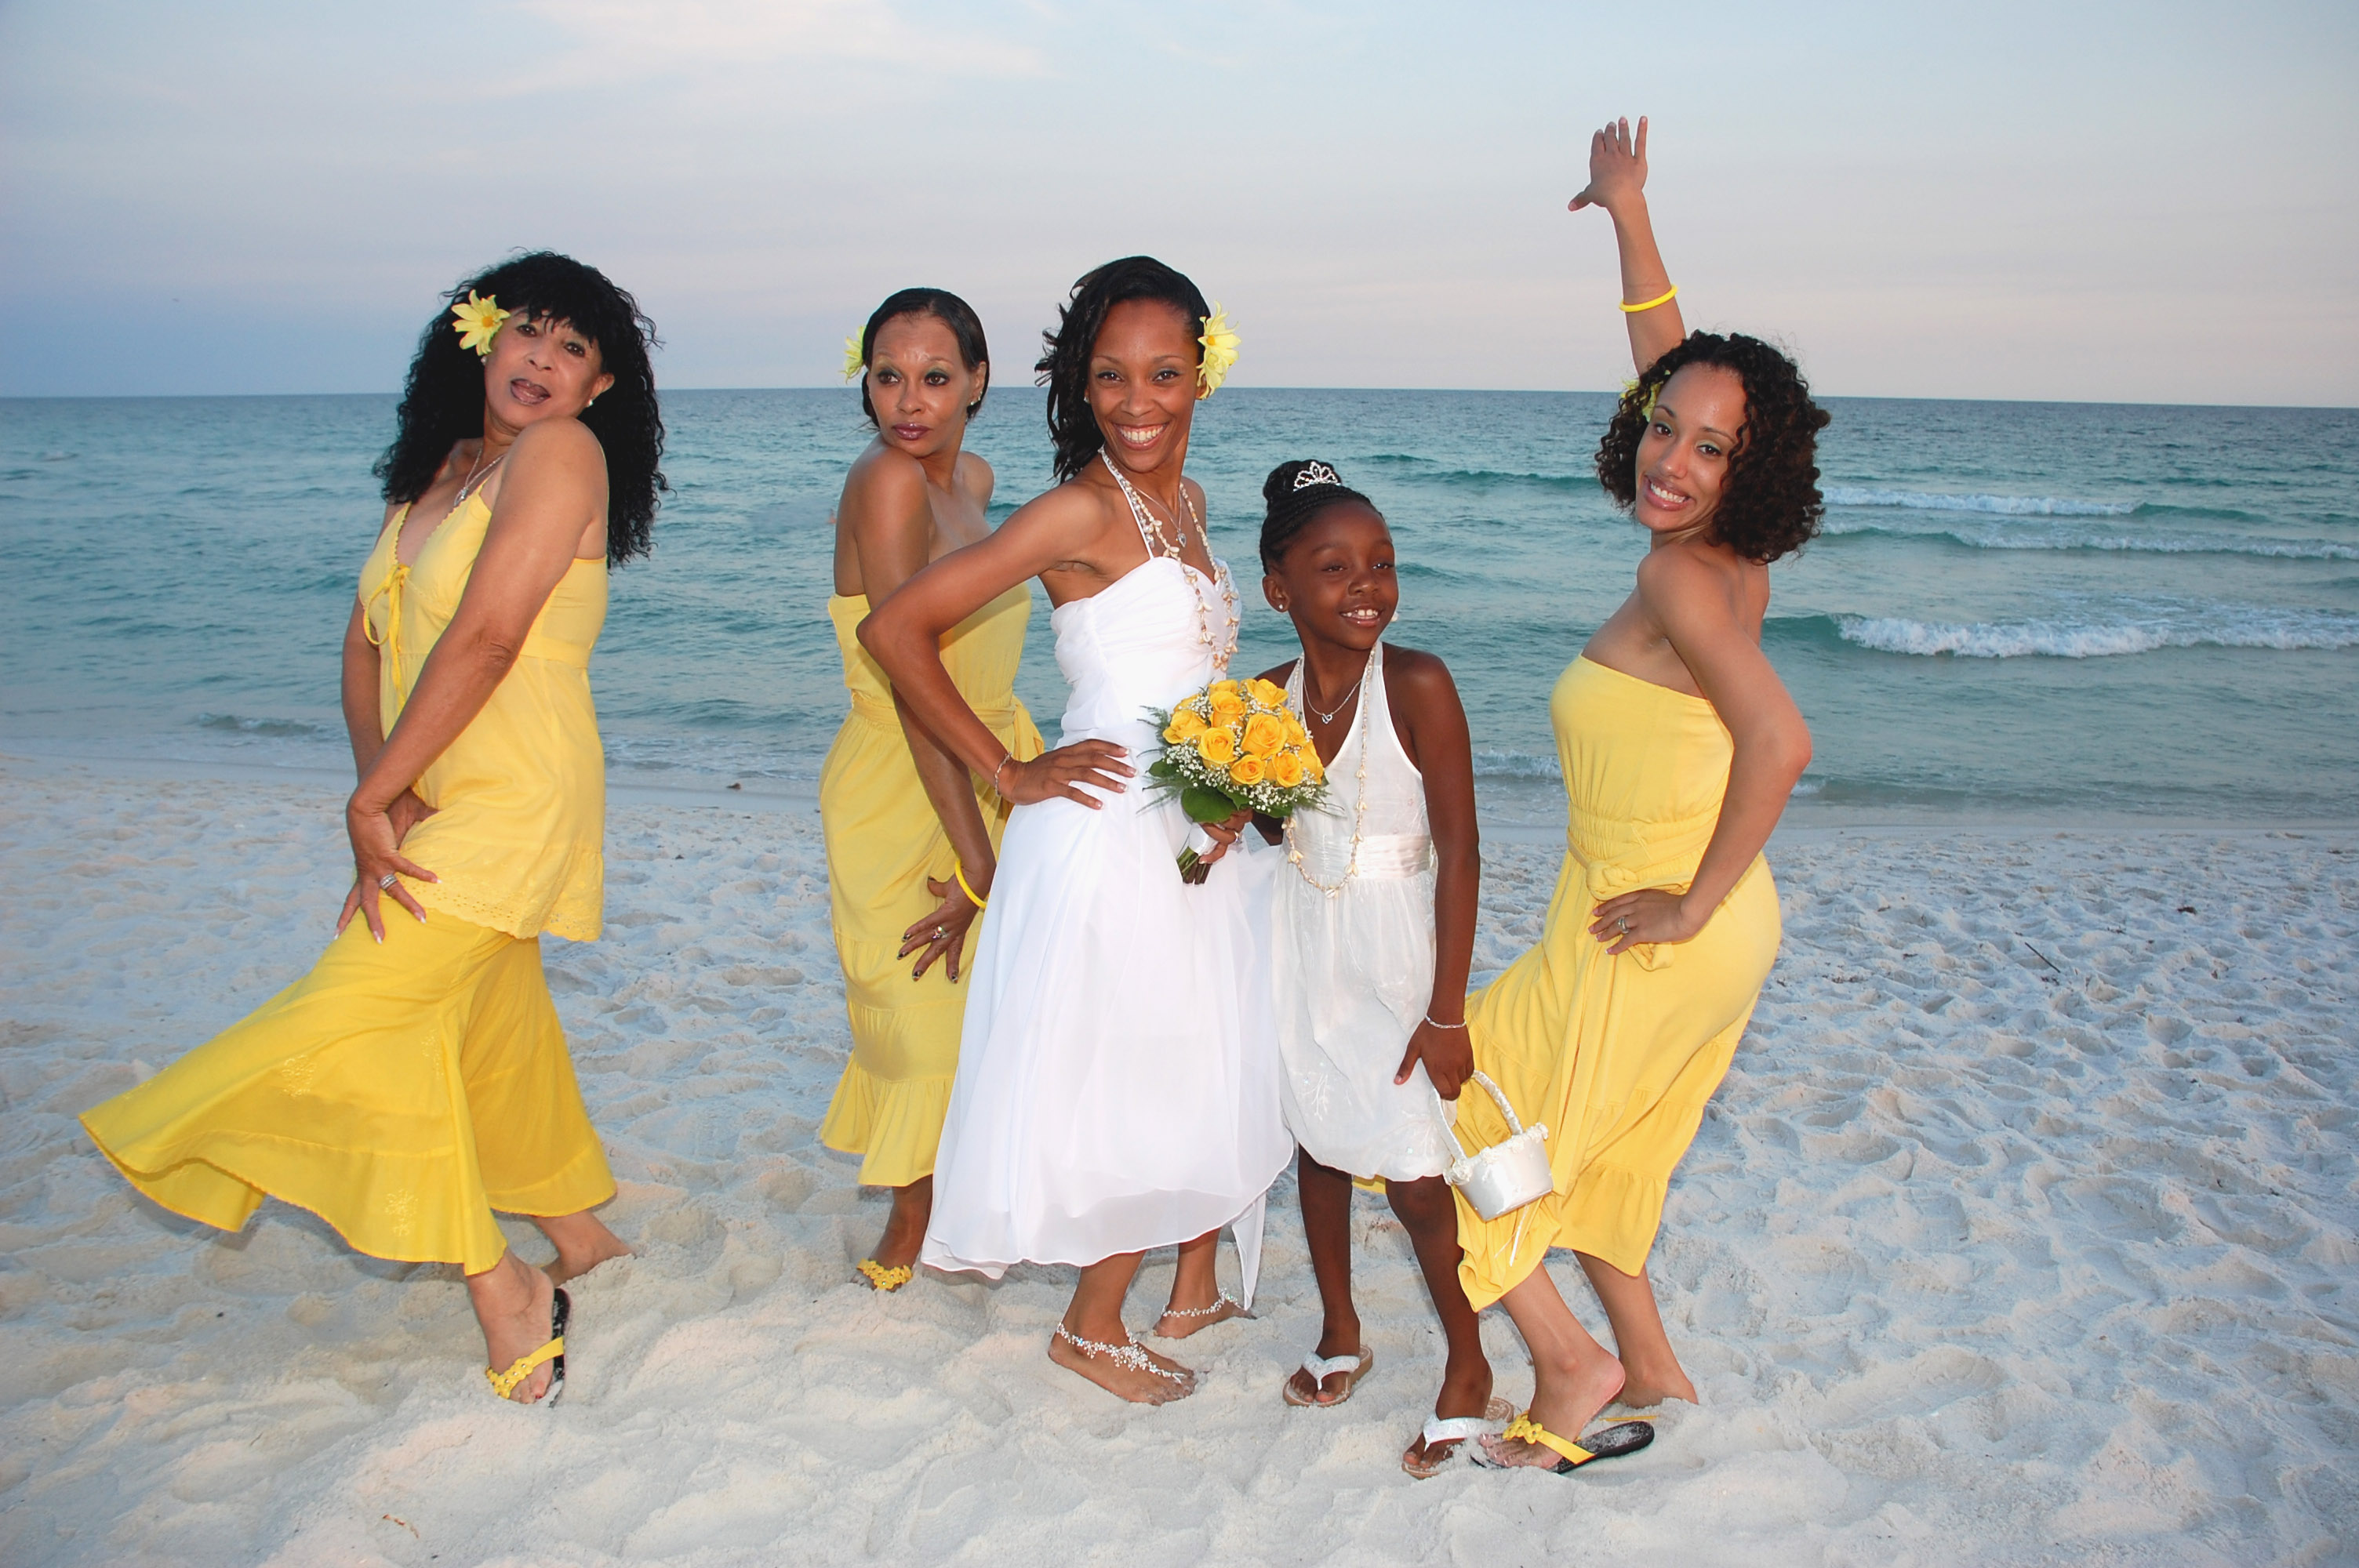 Download this Barefoot Weddings Beach Florida picture